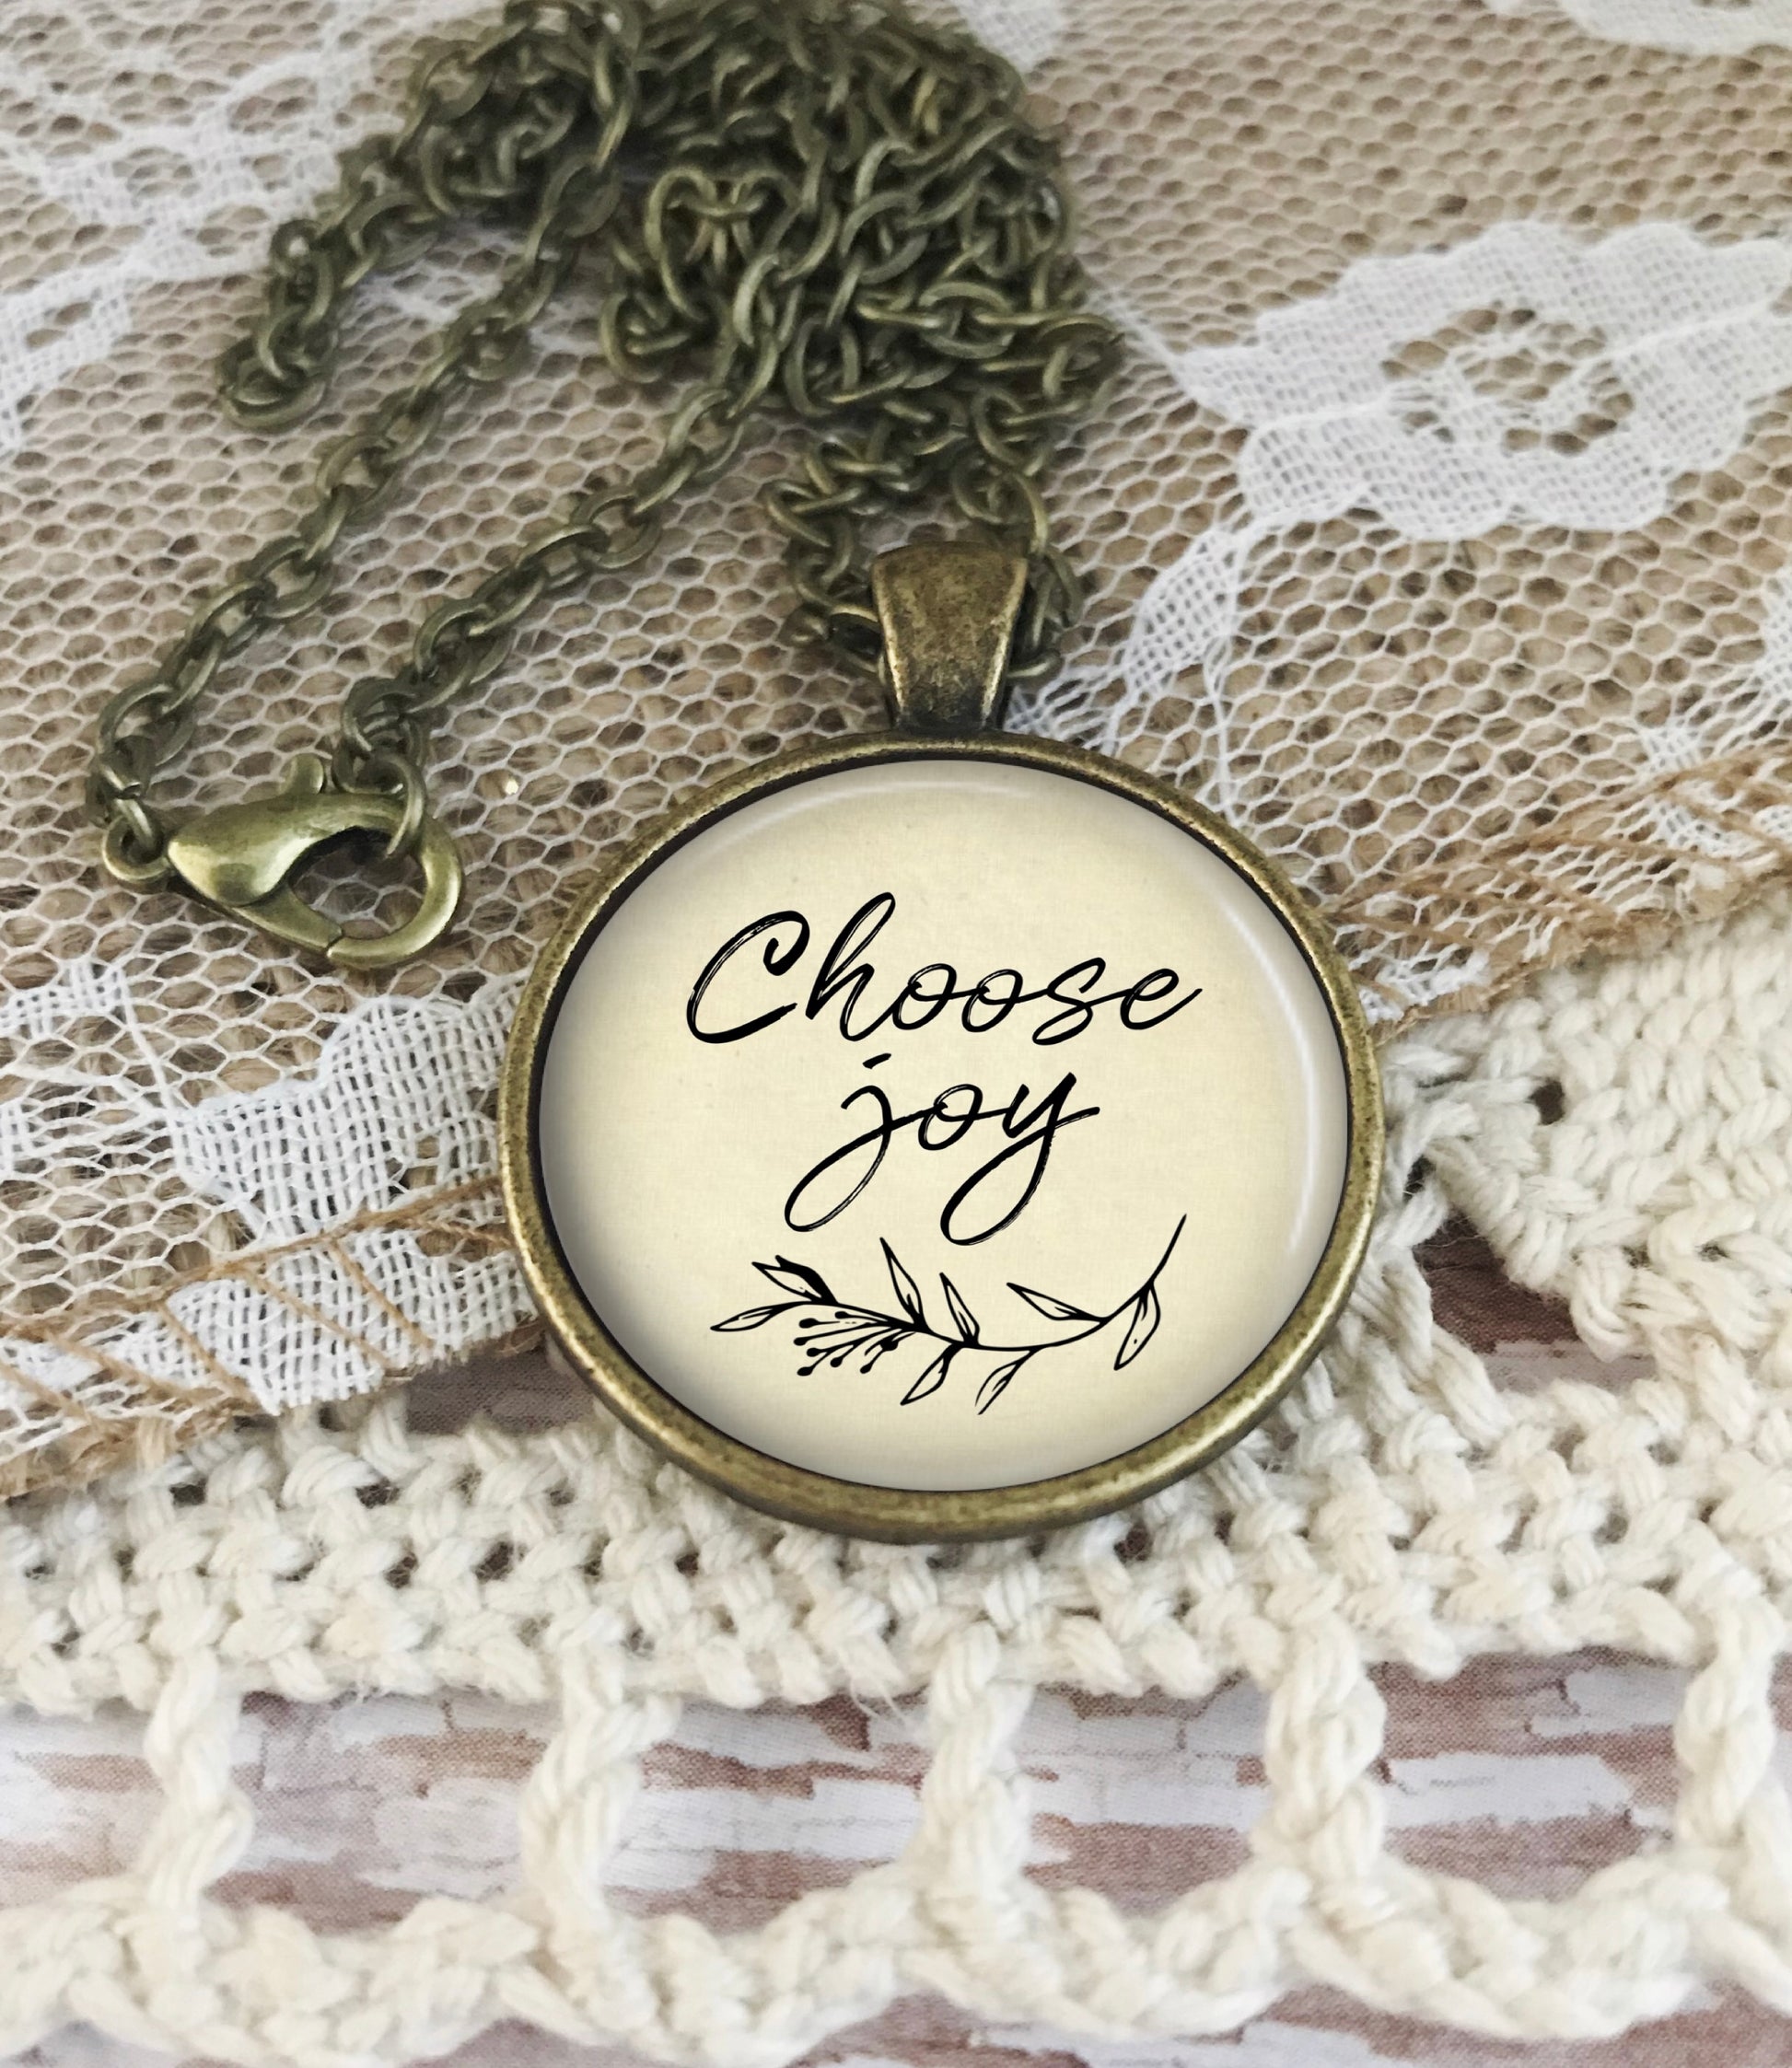 Choose Joy Necklace inspirational gift to her in antique silver or vintage gold (bronze) tones